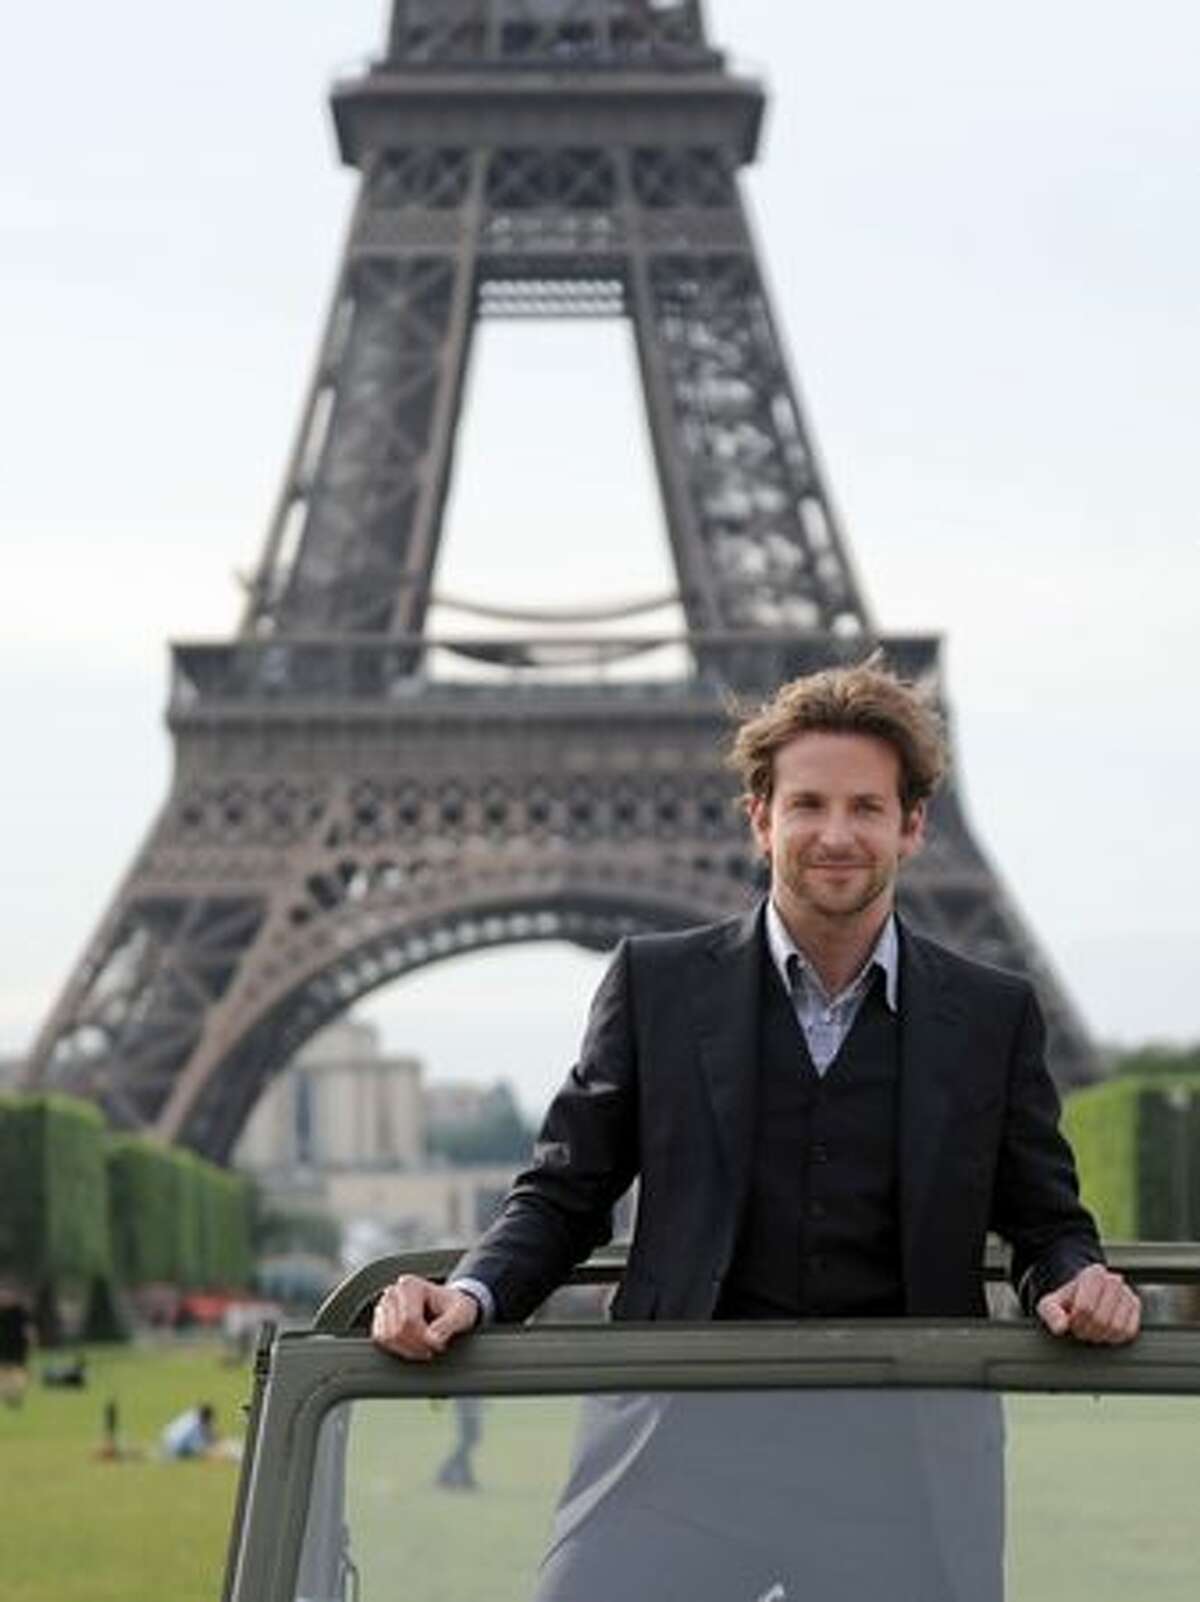 Actor Bradley Cooper poses in a car in front of the Eiffel Tower during a photocall for the release in France of the A-team film.